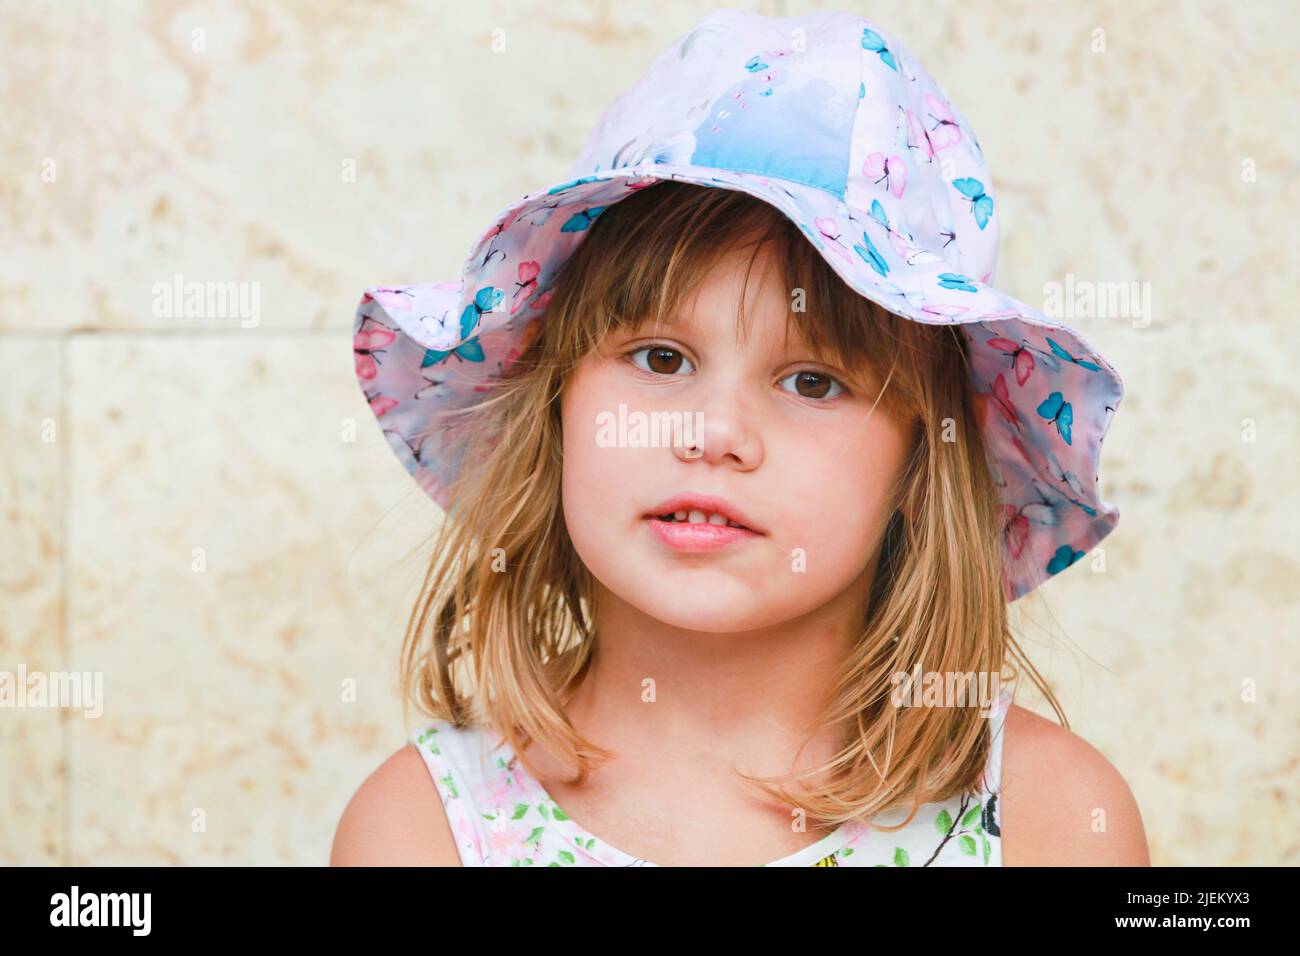 Cute European baby girl in colorful Panama hat, close-up face portrait Stock Photo